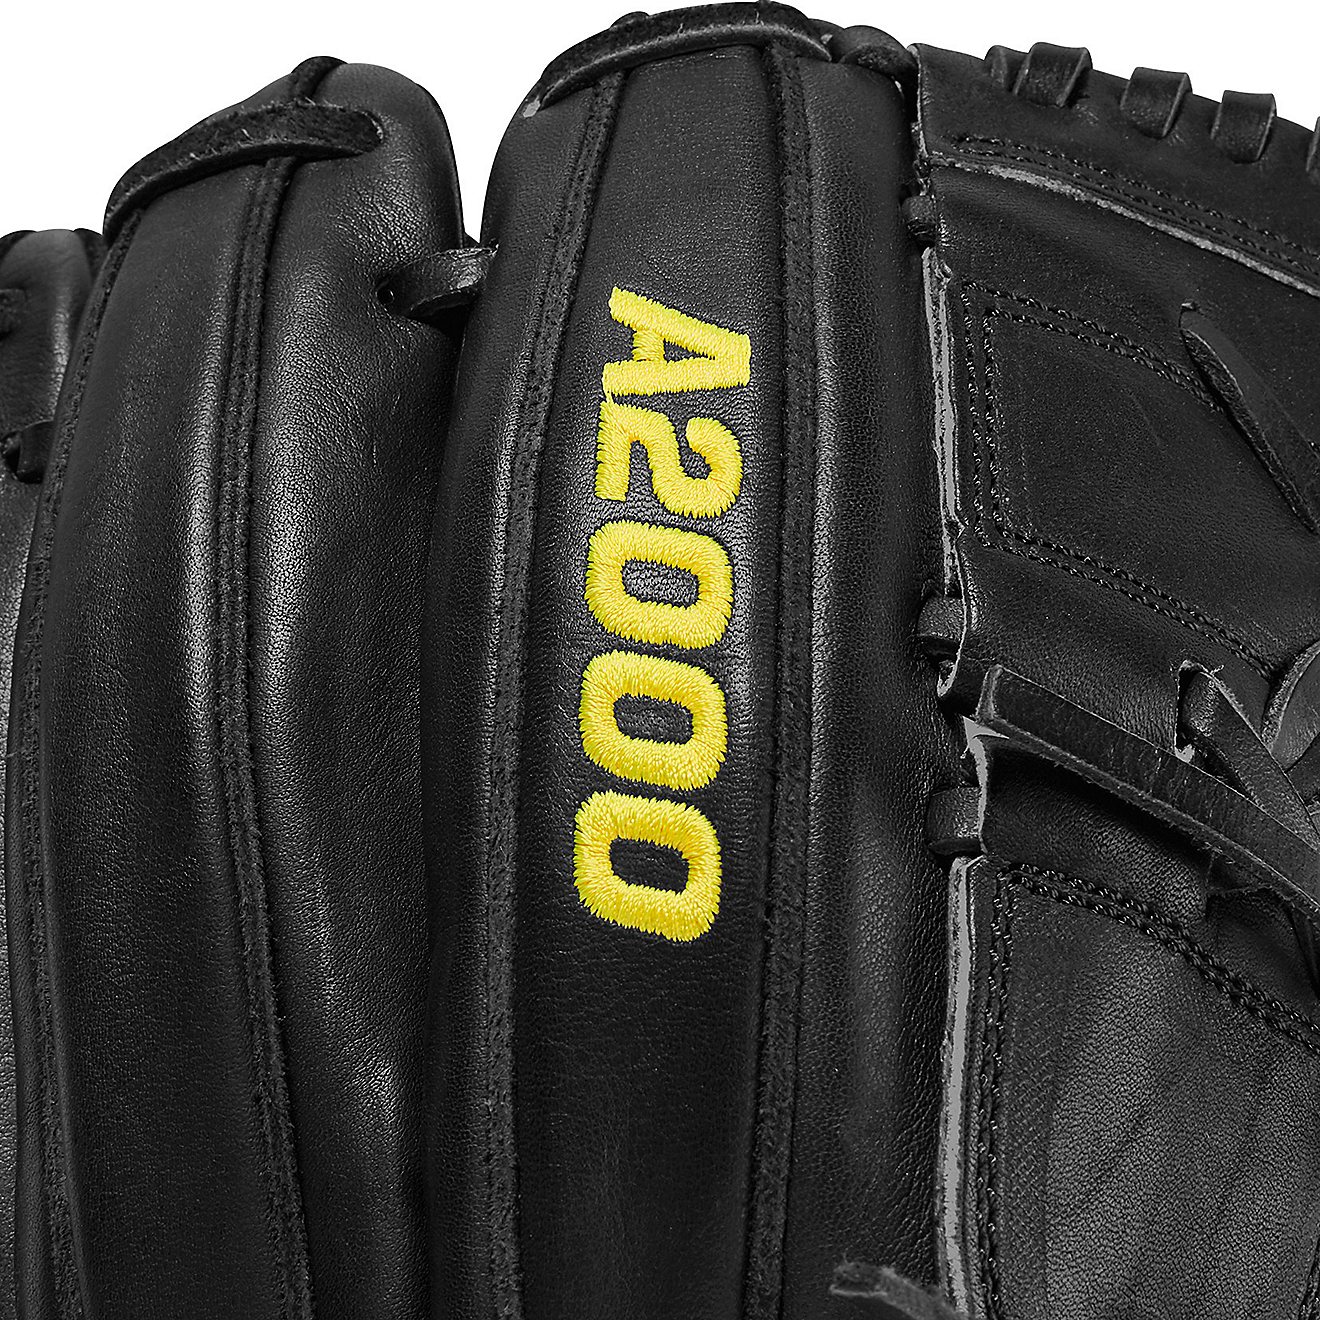 Wilson 2021 A2000 11.75 in. Clayton Kershaw Pitcher's Baseball Glove                                                             - view number 7